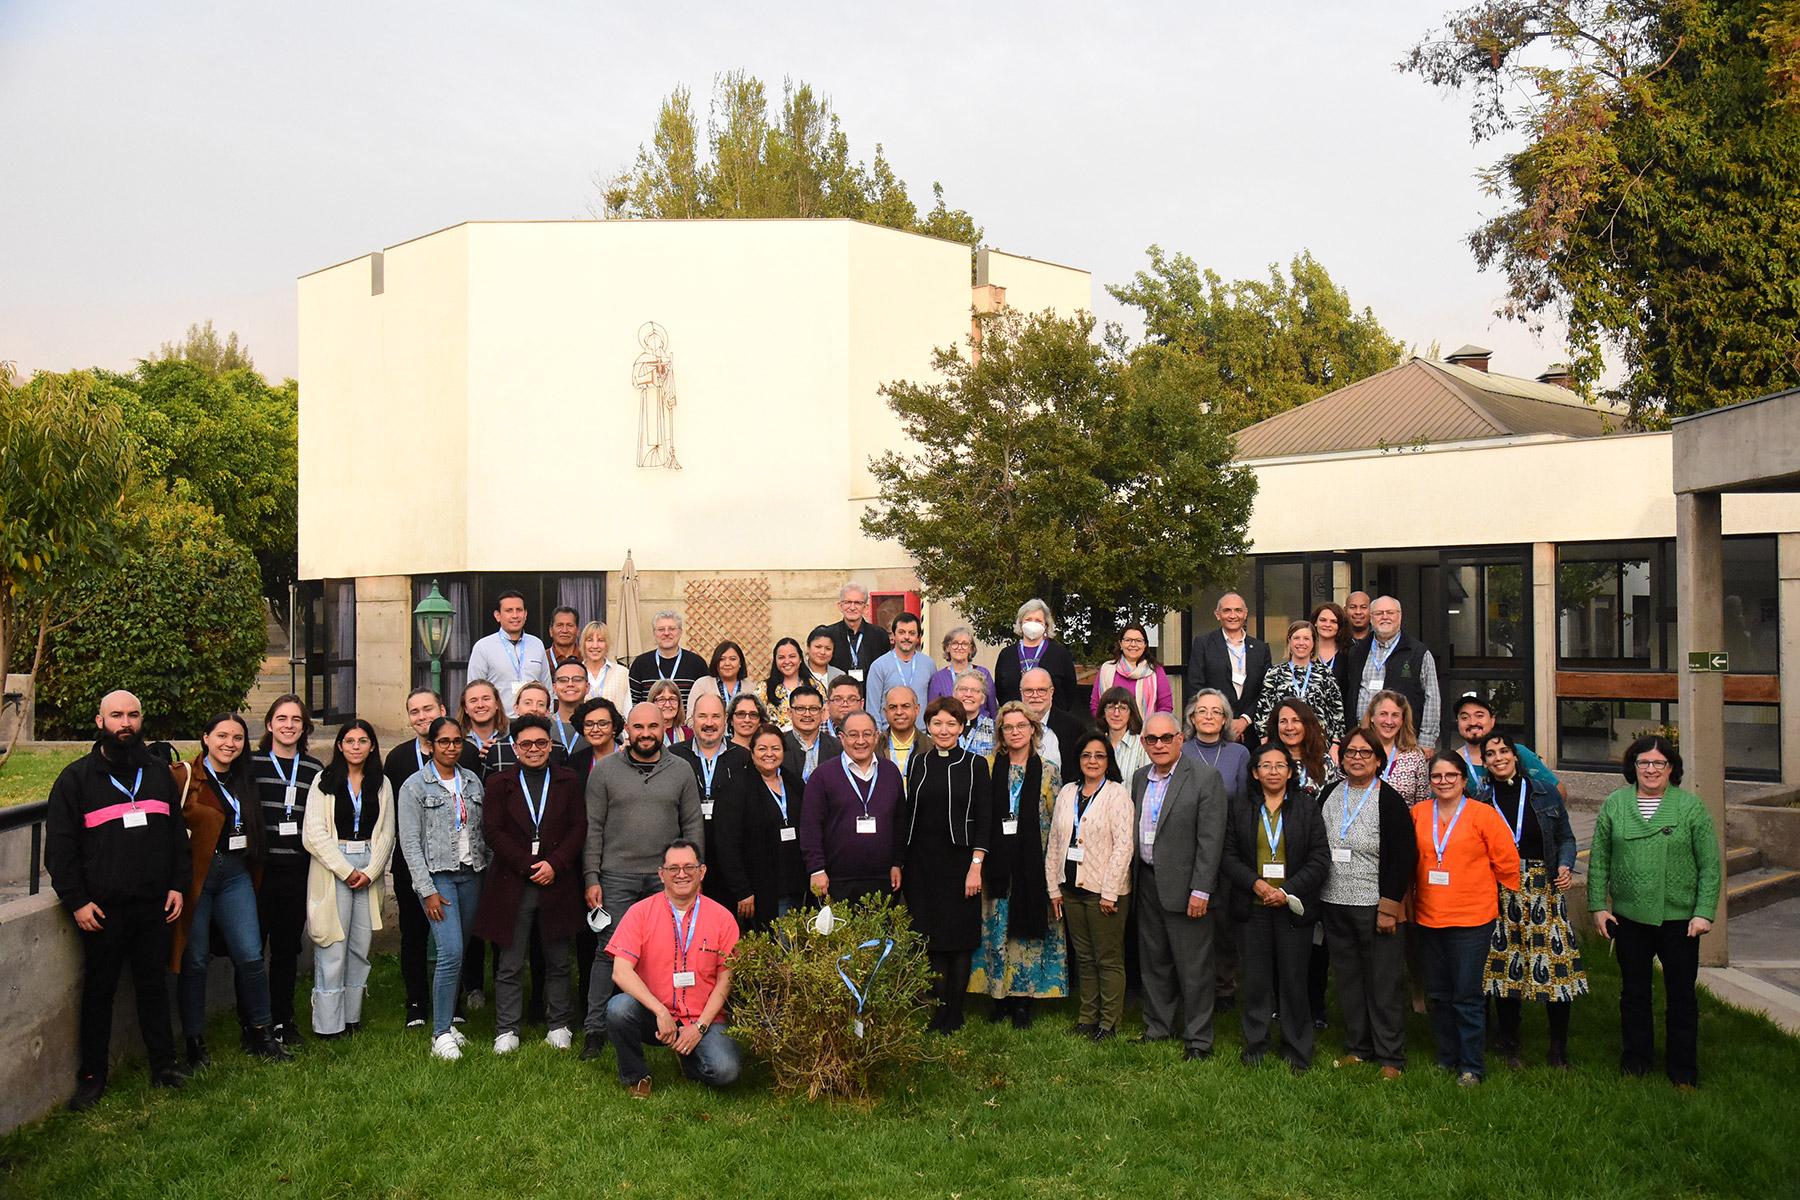 Leadersfrom the LWF member churches in Latin America and the Caribbean and North America gathered from 9-13 May for the Leadership Conference of the Americas. Photo: LWF/E.Albrecht